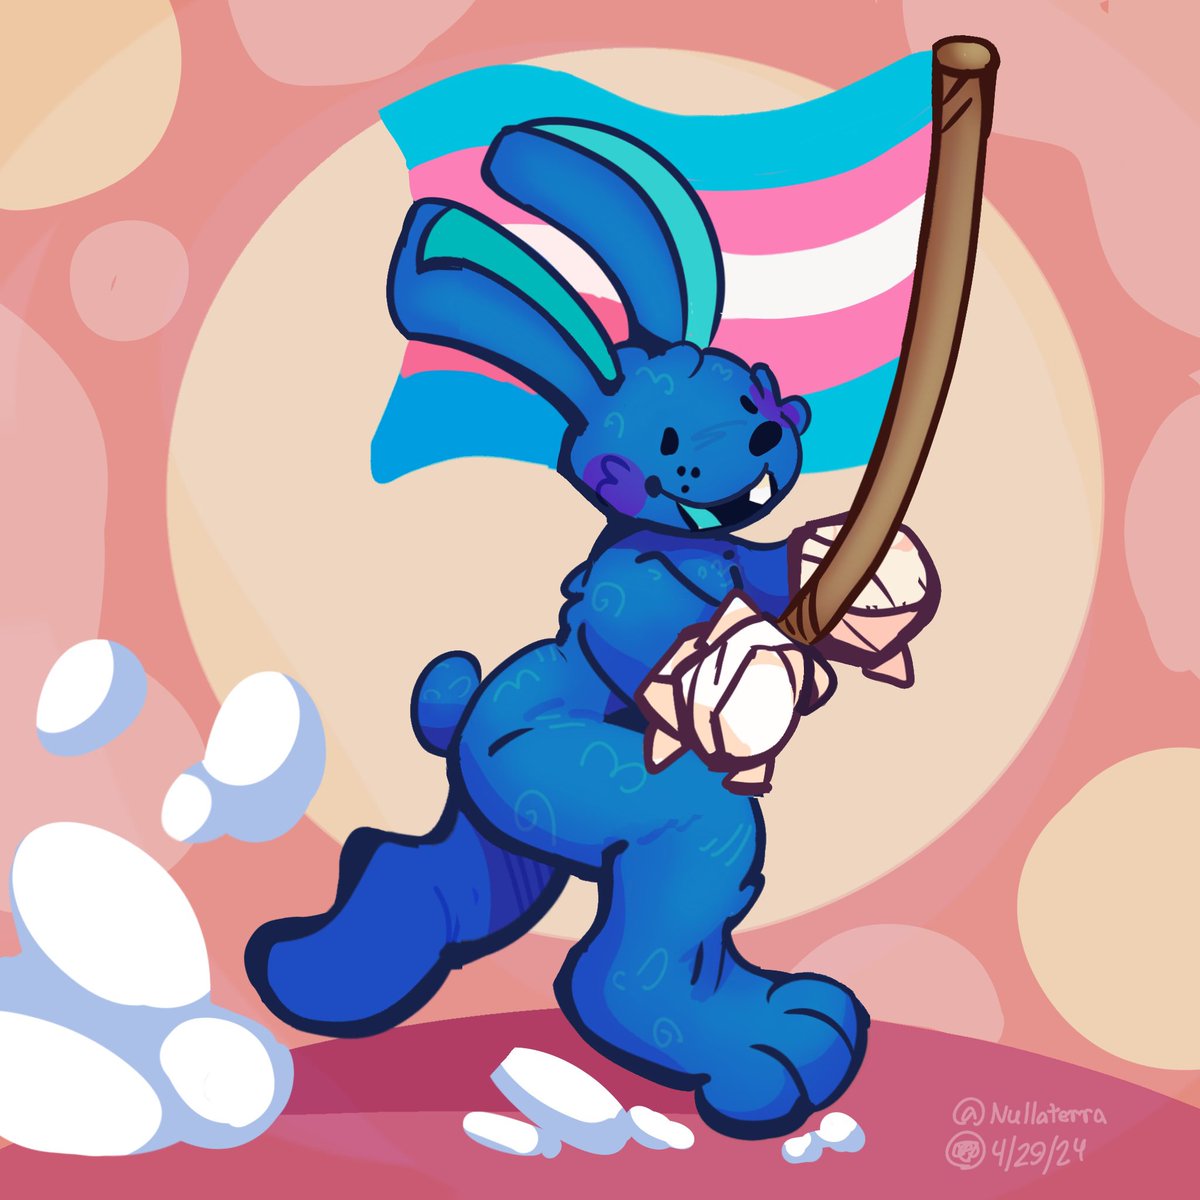 stumbler o’ hare says trans rights !!!

#shipwrecked64